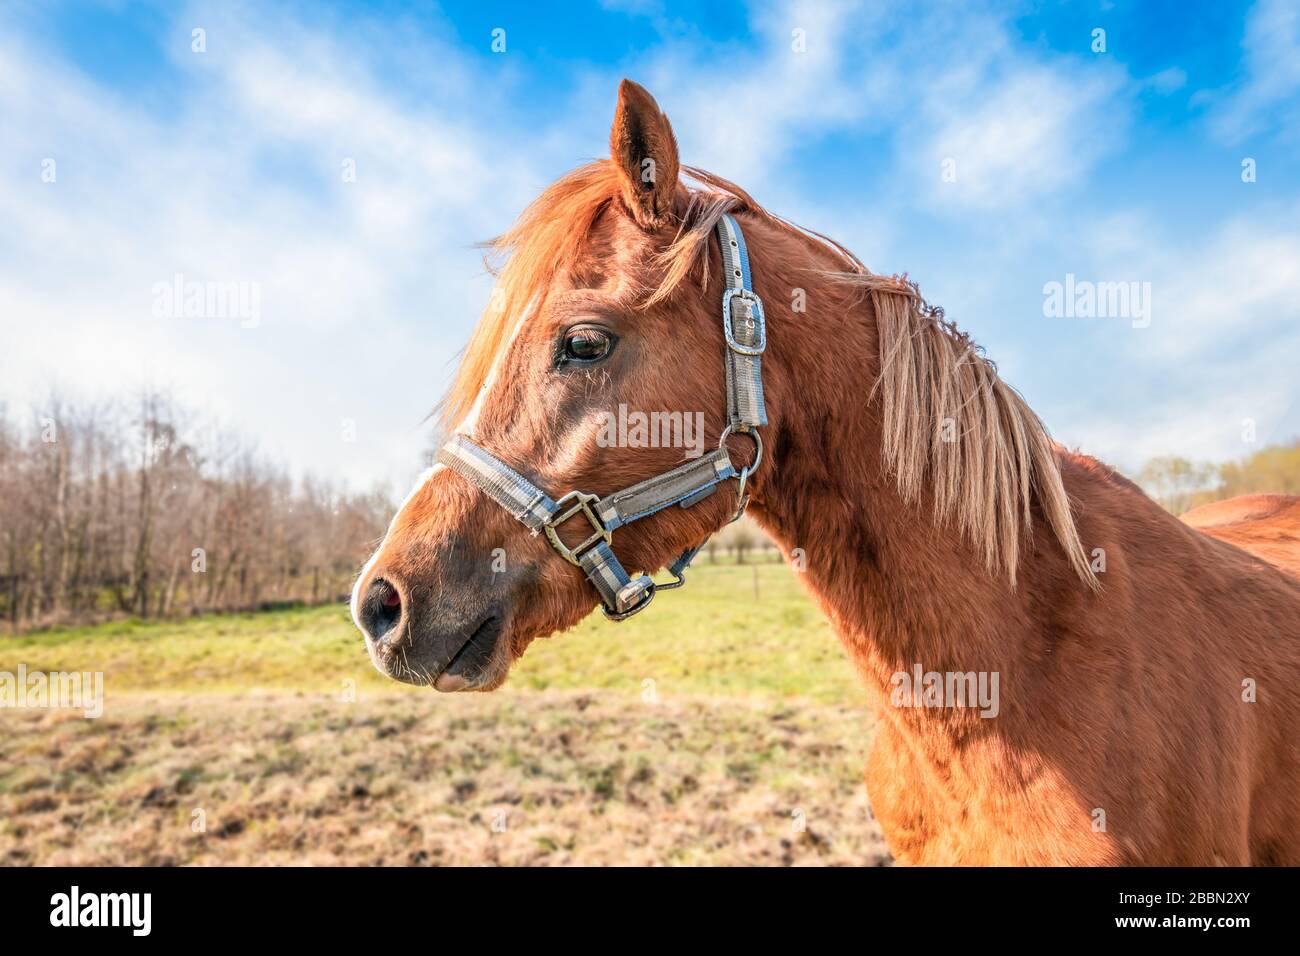 Portrait of a horse head. Side view of a brown horse with a blonde mane on a pasture. Nature background. Stock Photo